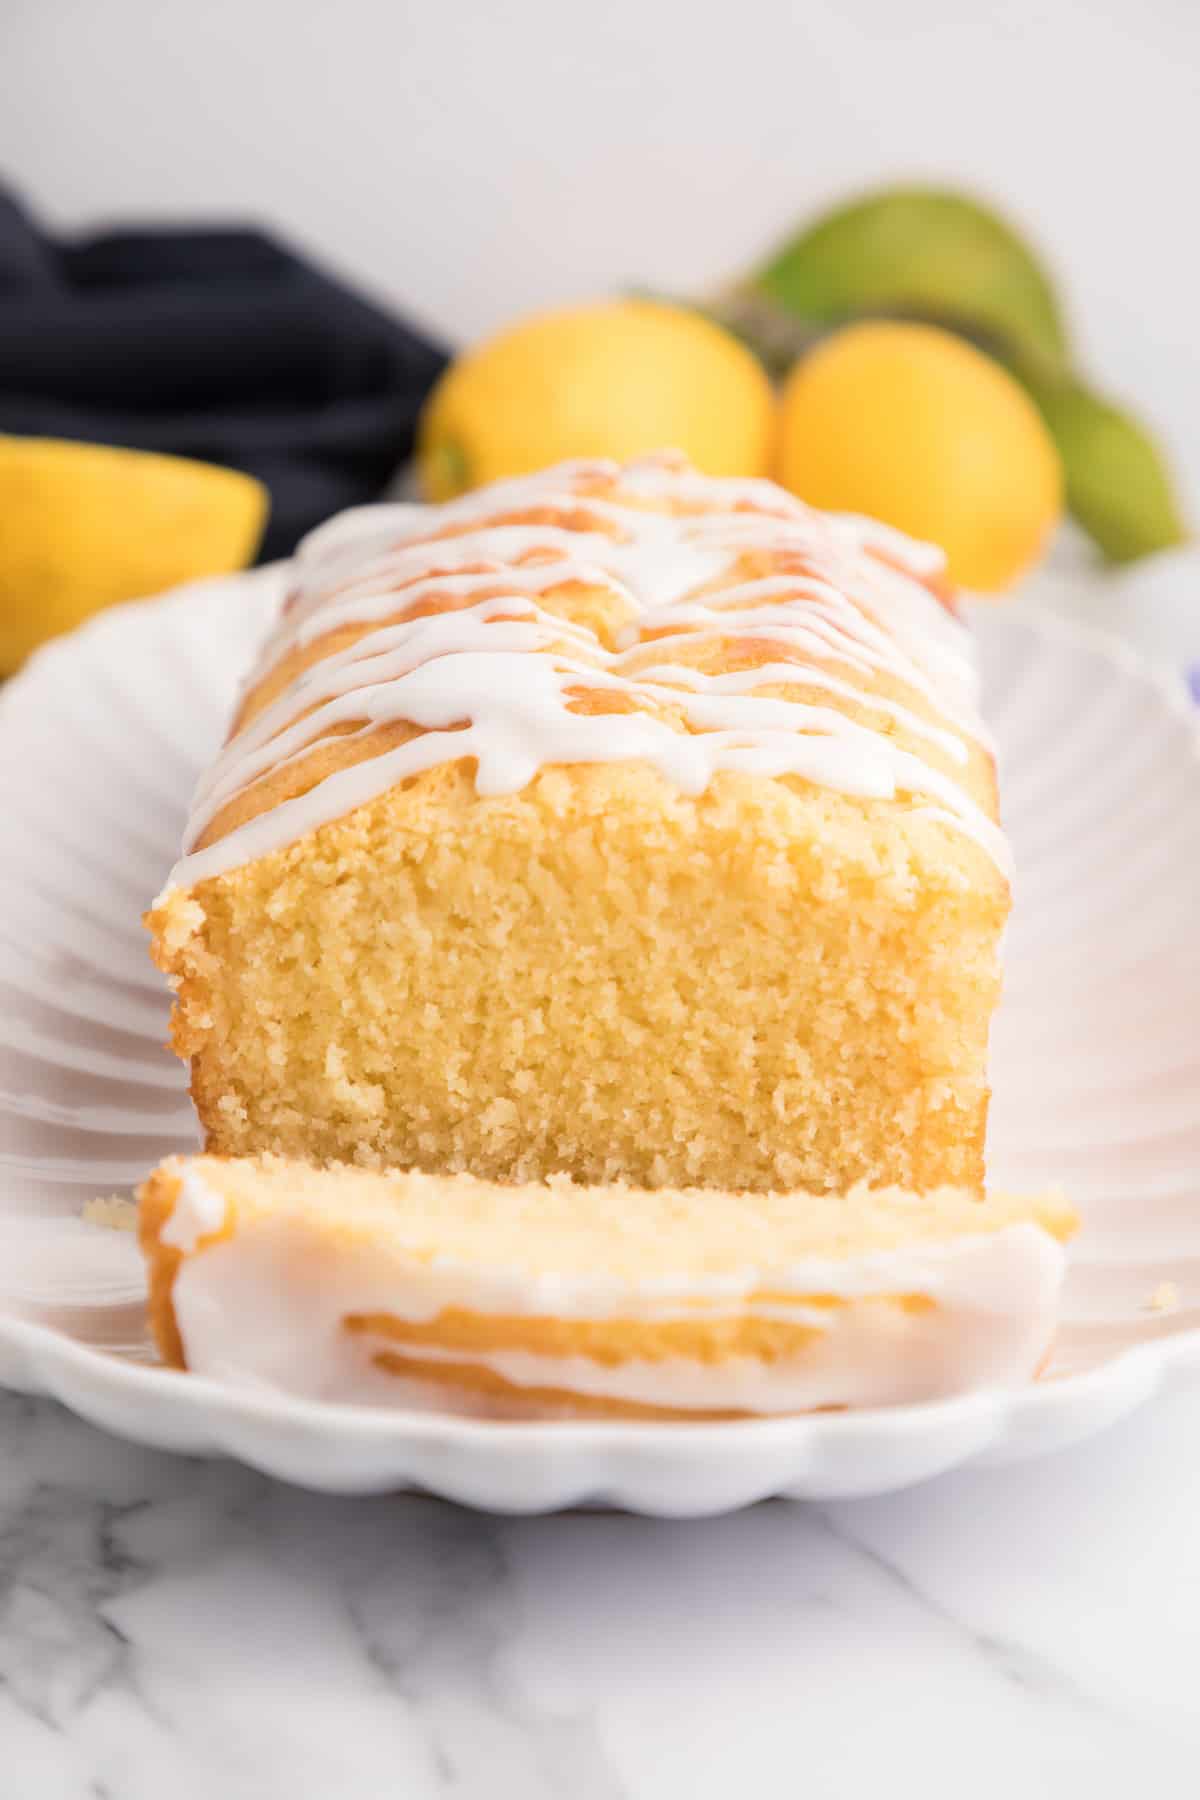 A lemon drizzle cake facing the front with one slice cut leaning forward on a white plate with lemons and a towel in the background.